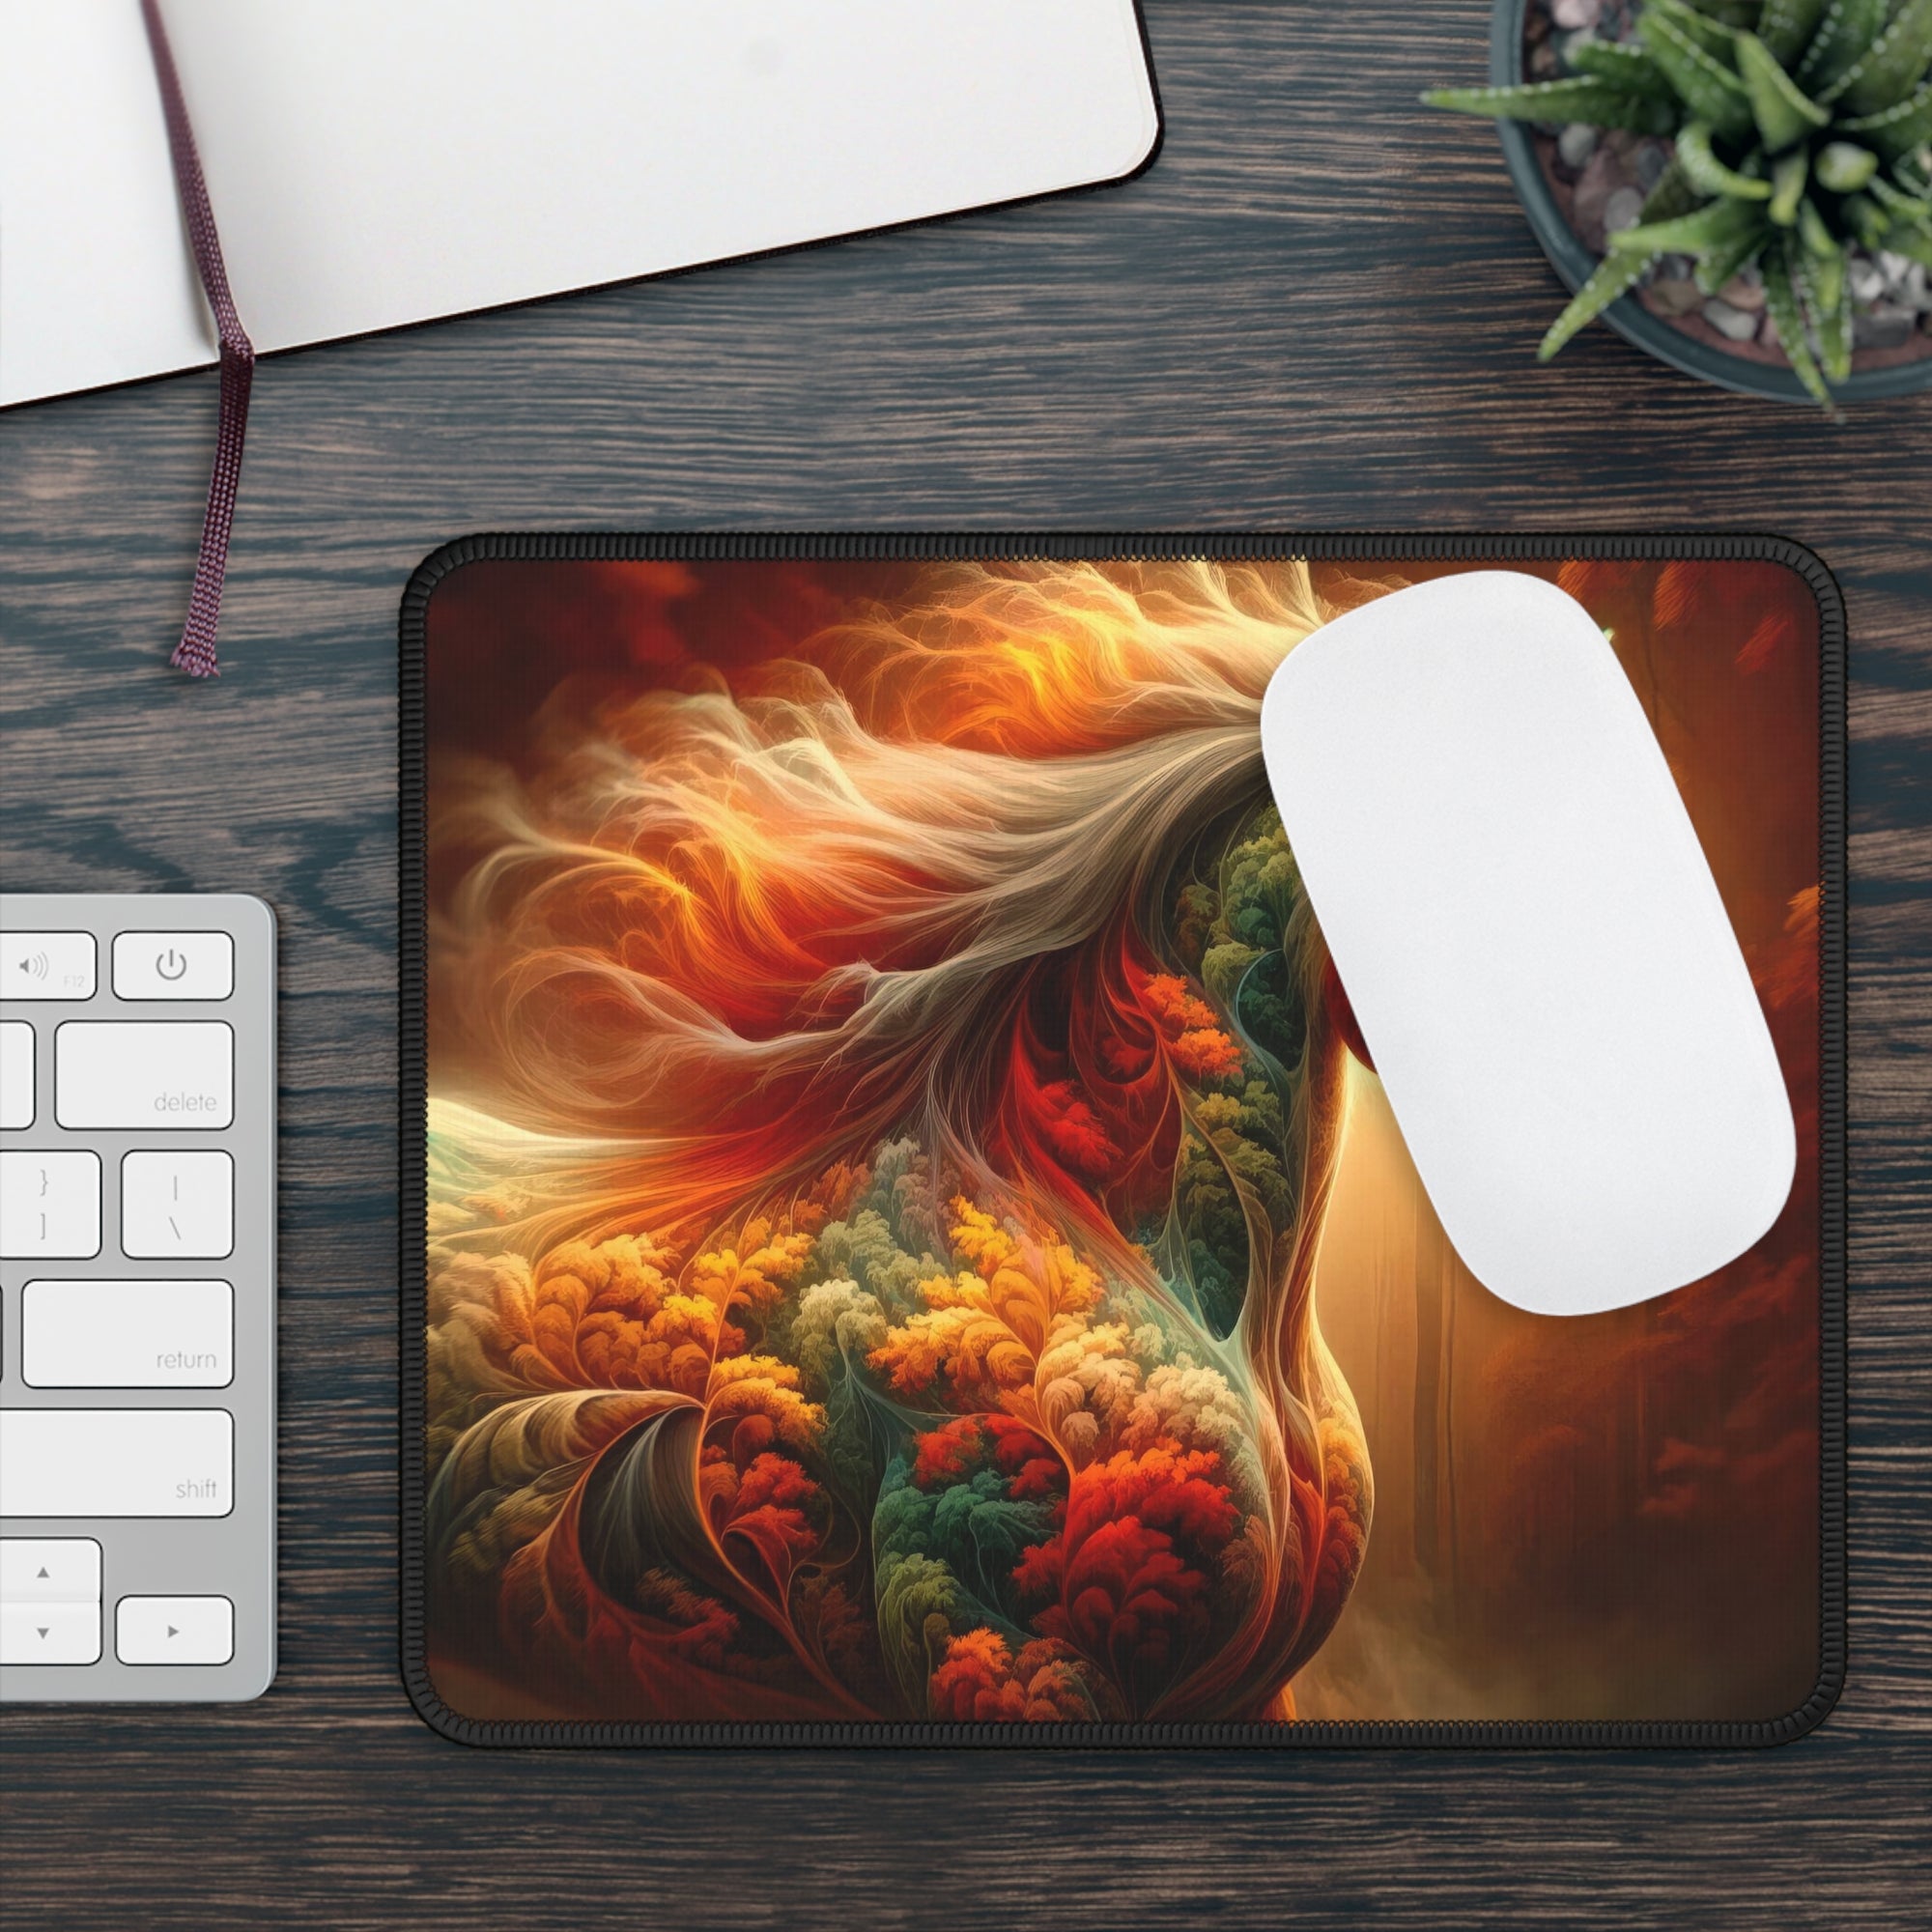 The Equine Illusion Gaming Mouse Pad